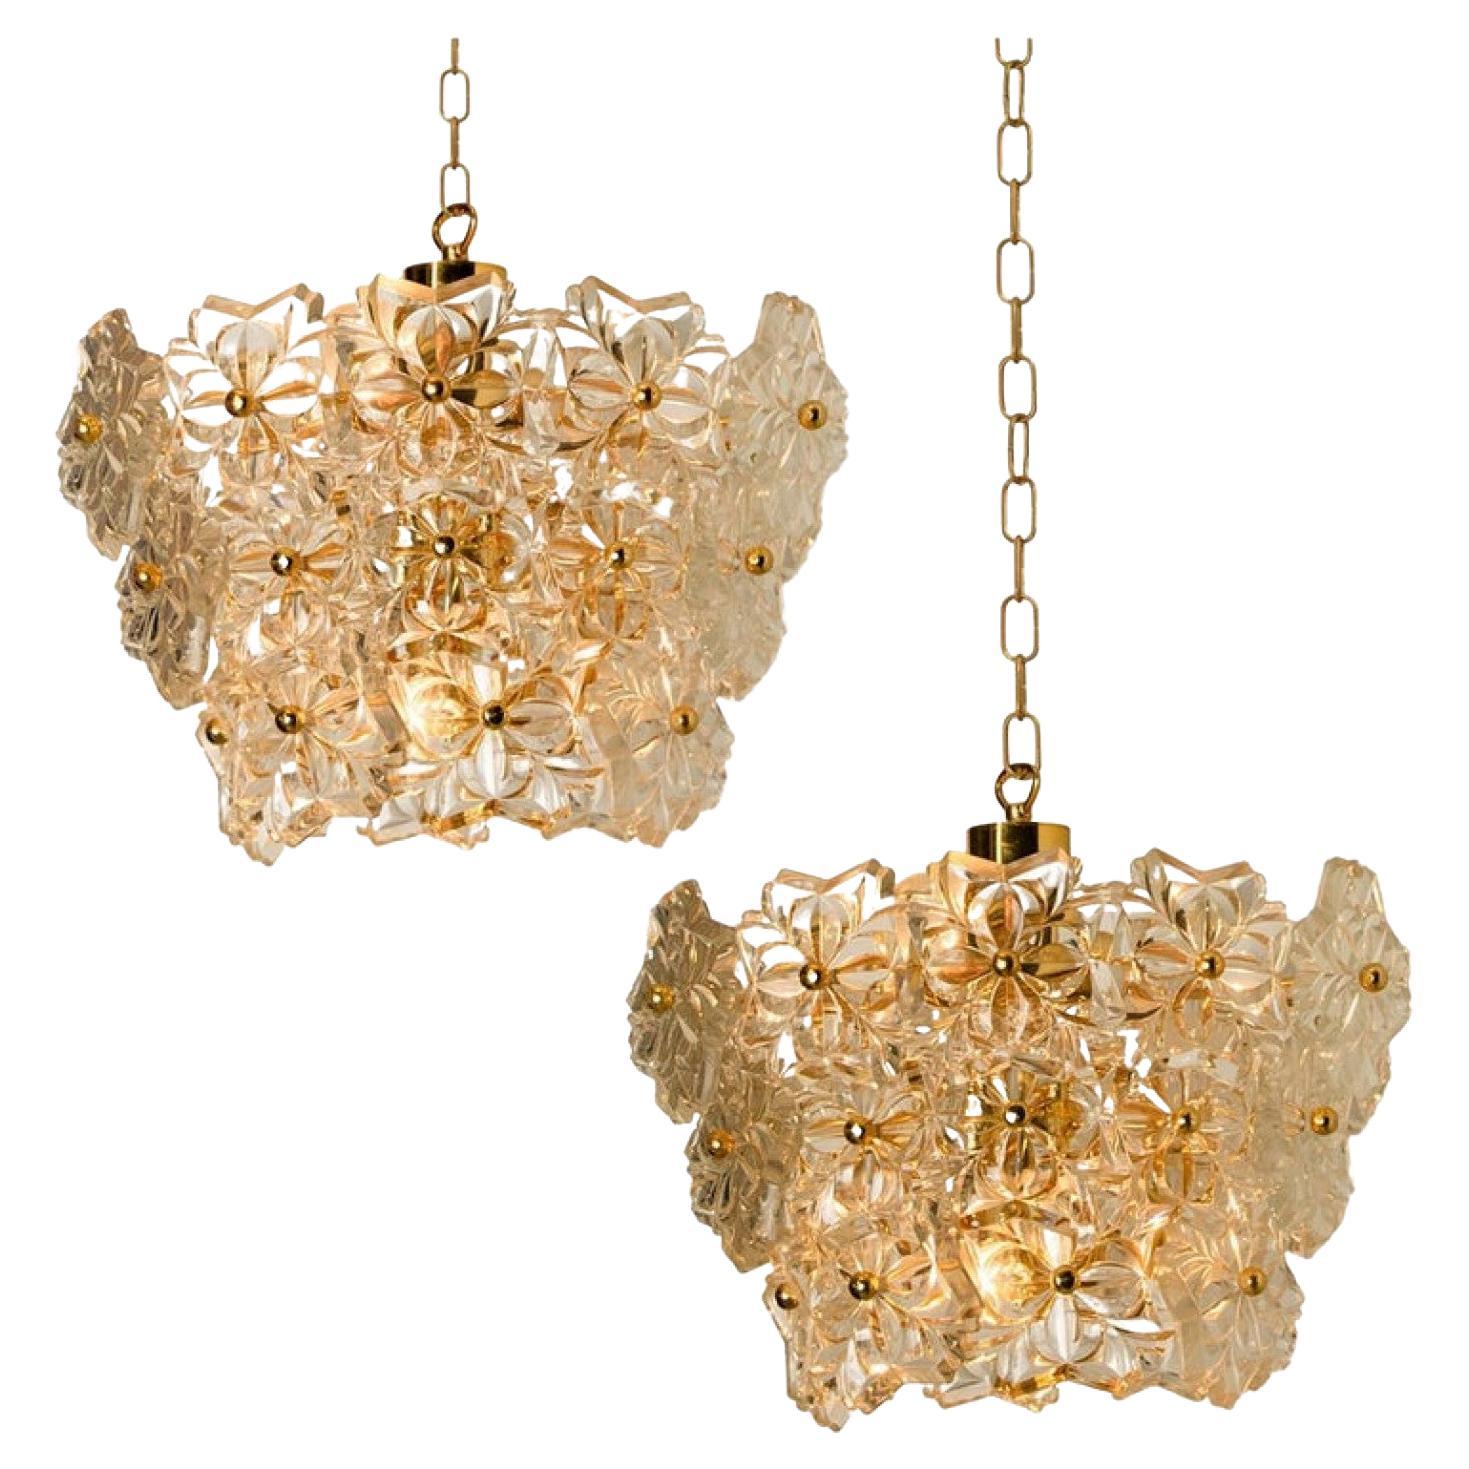 Pair of Glass and Brass Floral Three Tiers Light Fixture from Hillebrand, 1970s For Sale